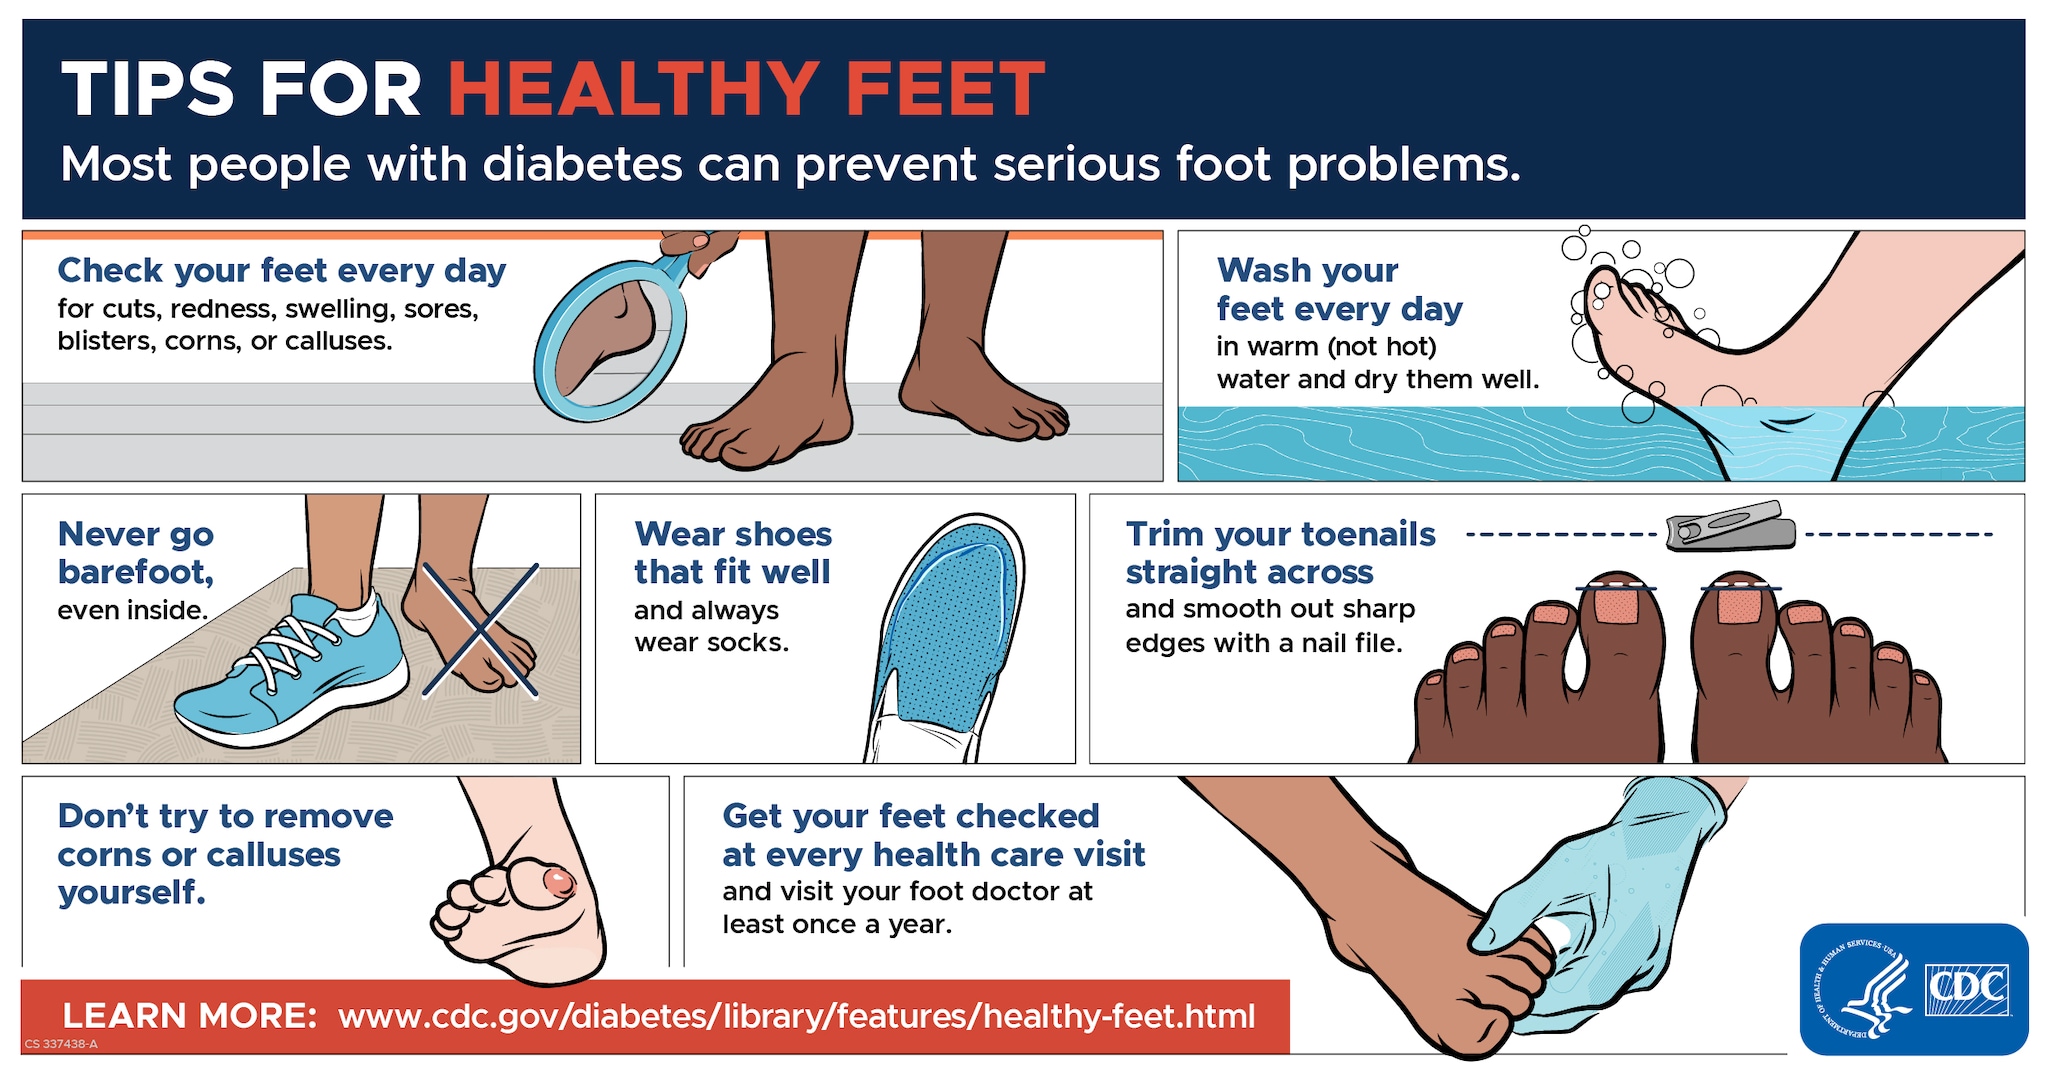 Tips for Healthy Feet infographic